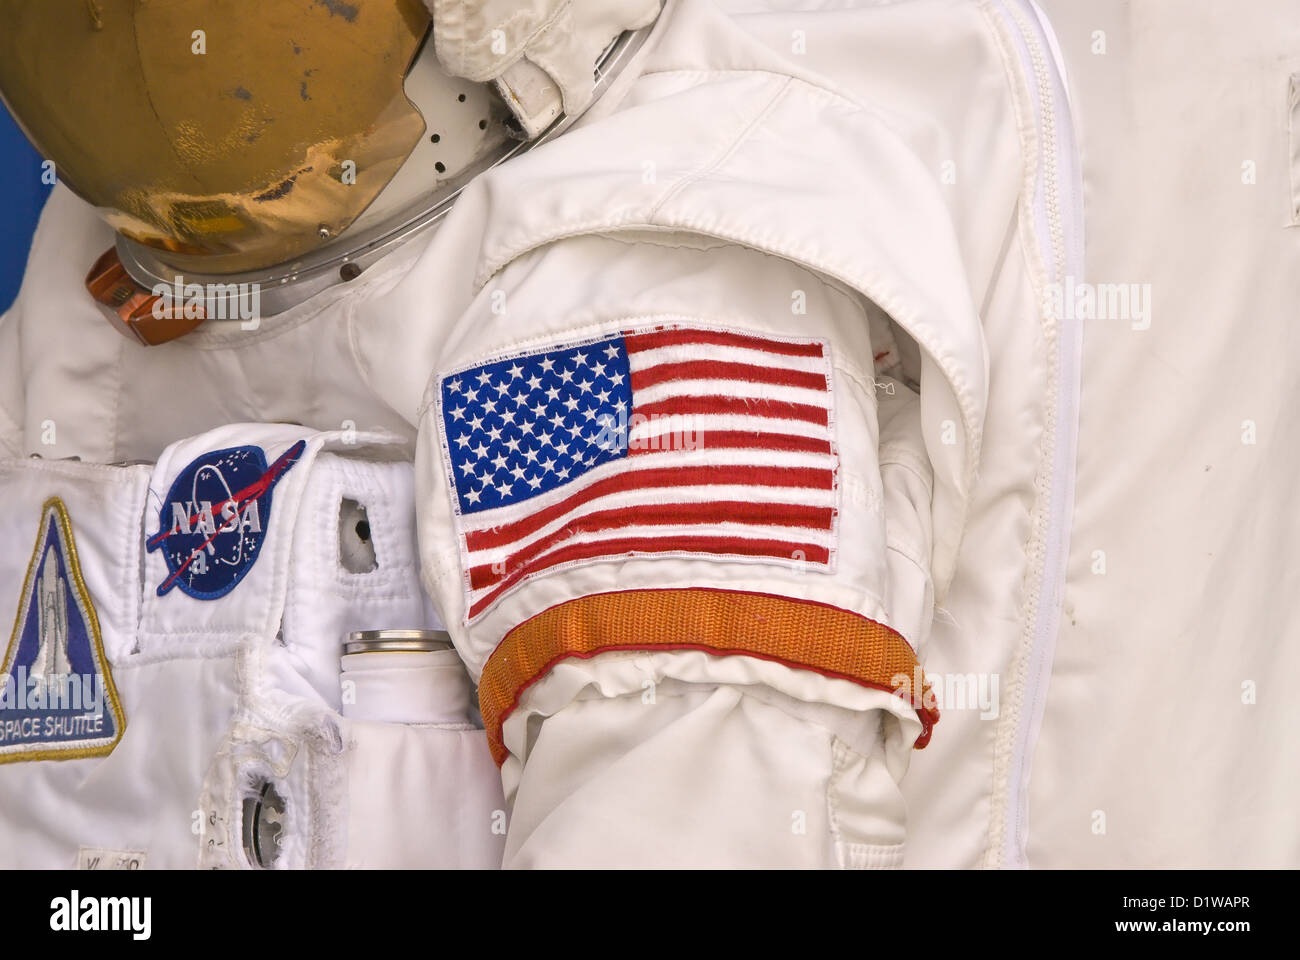 NASA astronaut space suit with American flag arm patch Kennedy Space Center Visitor Center, Florida Stock Photo